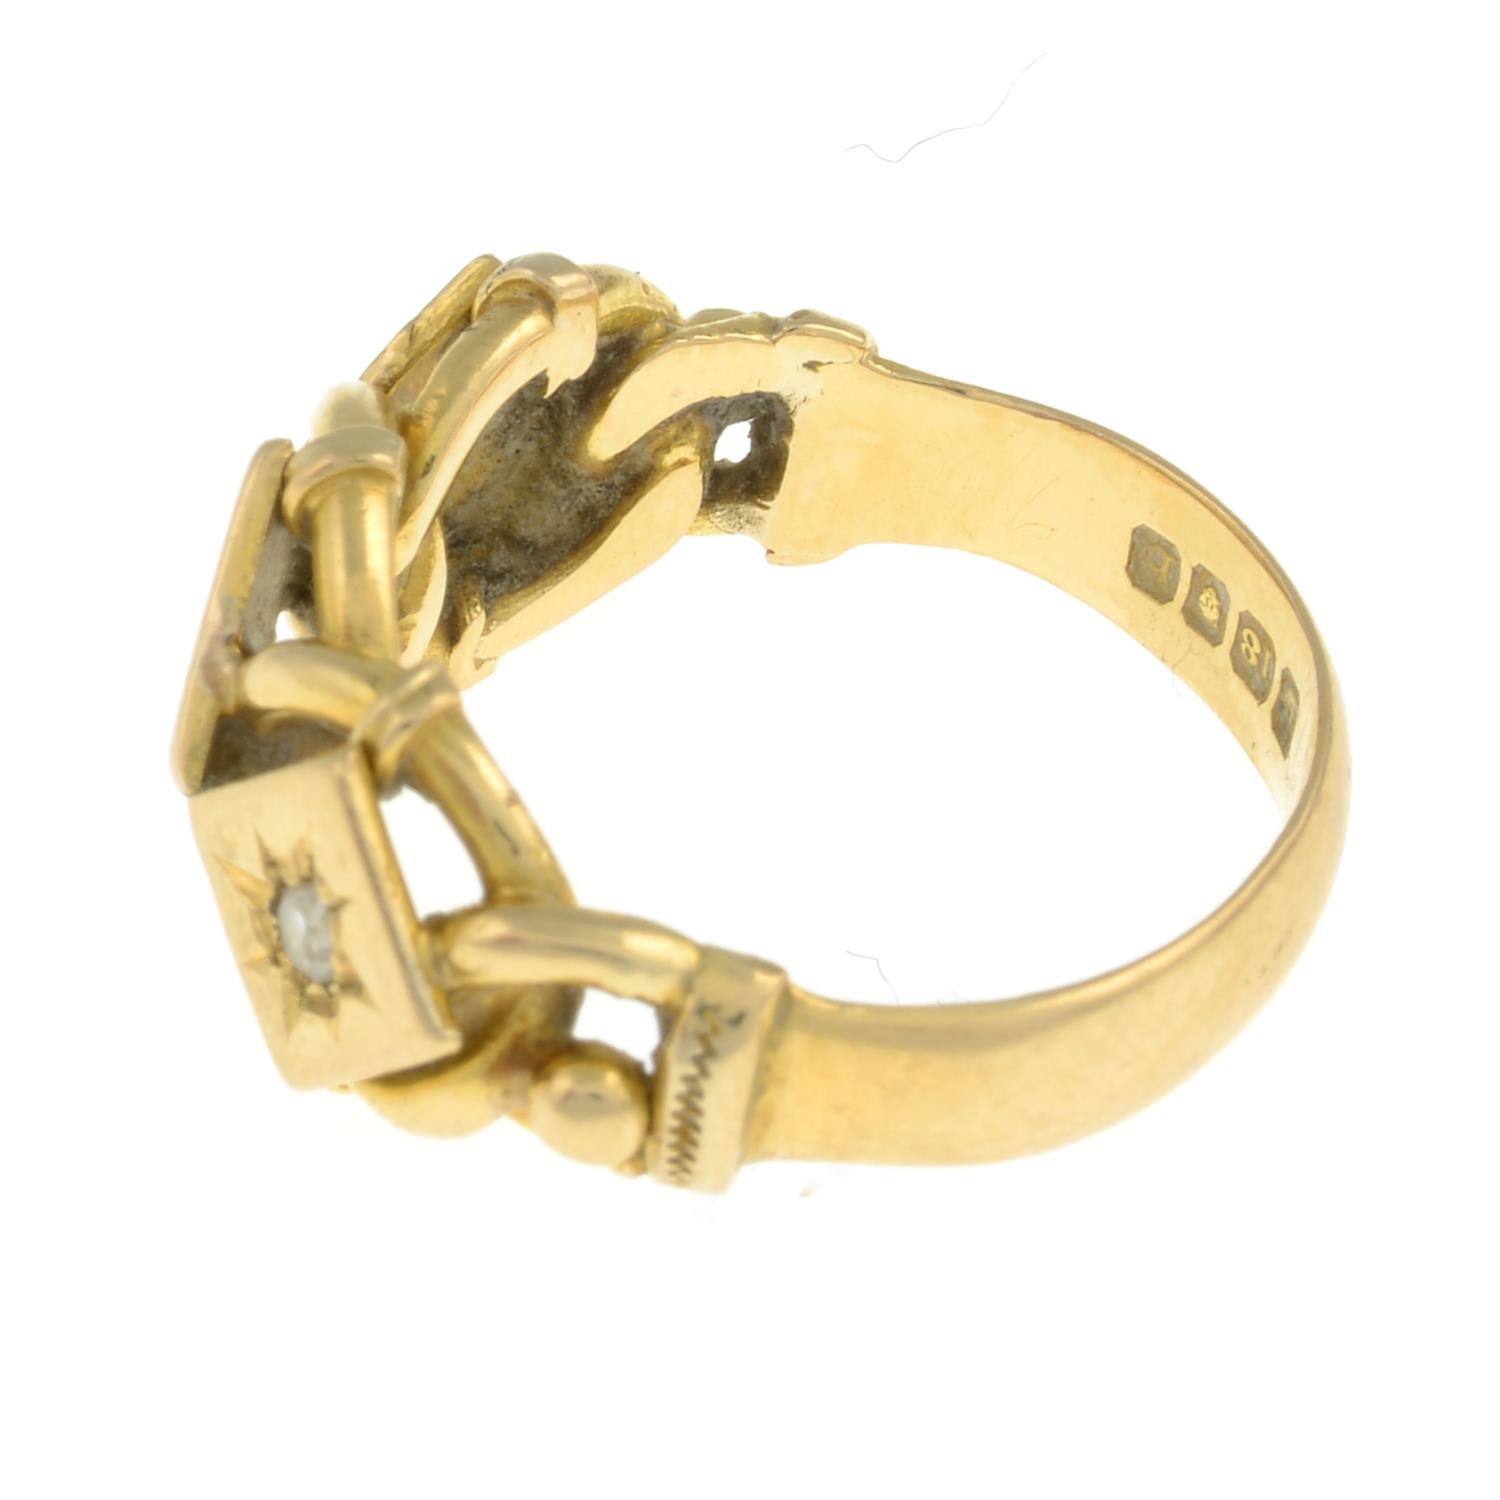 An early 20th century 18ct gold single-cut diamond ring.Hallmarks for London, 1917.Ring size M. - Image 2 of 3